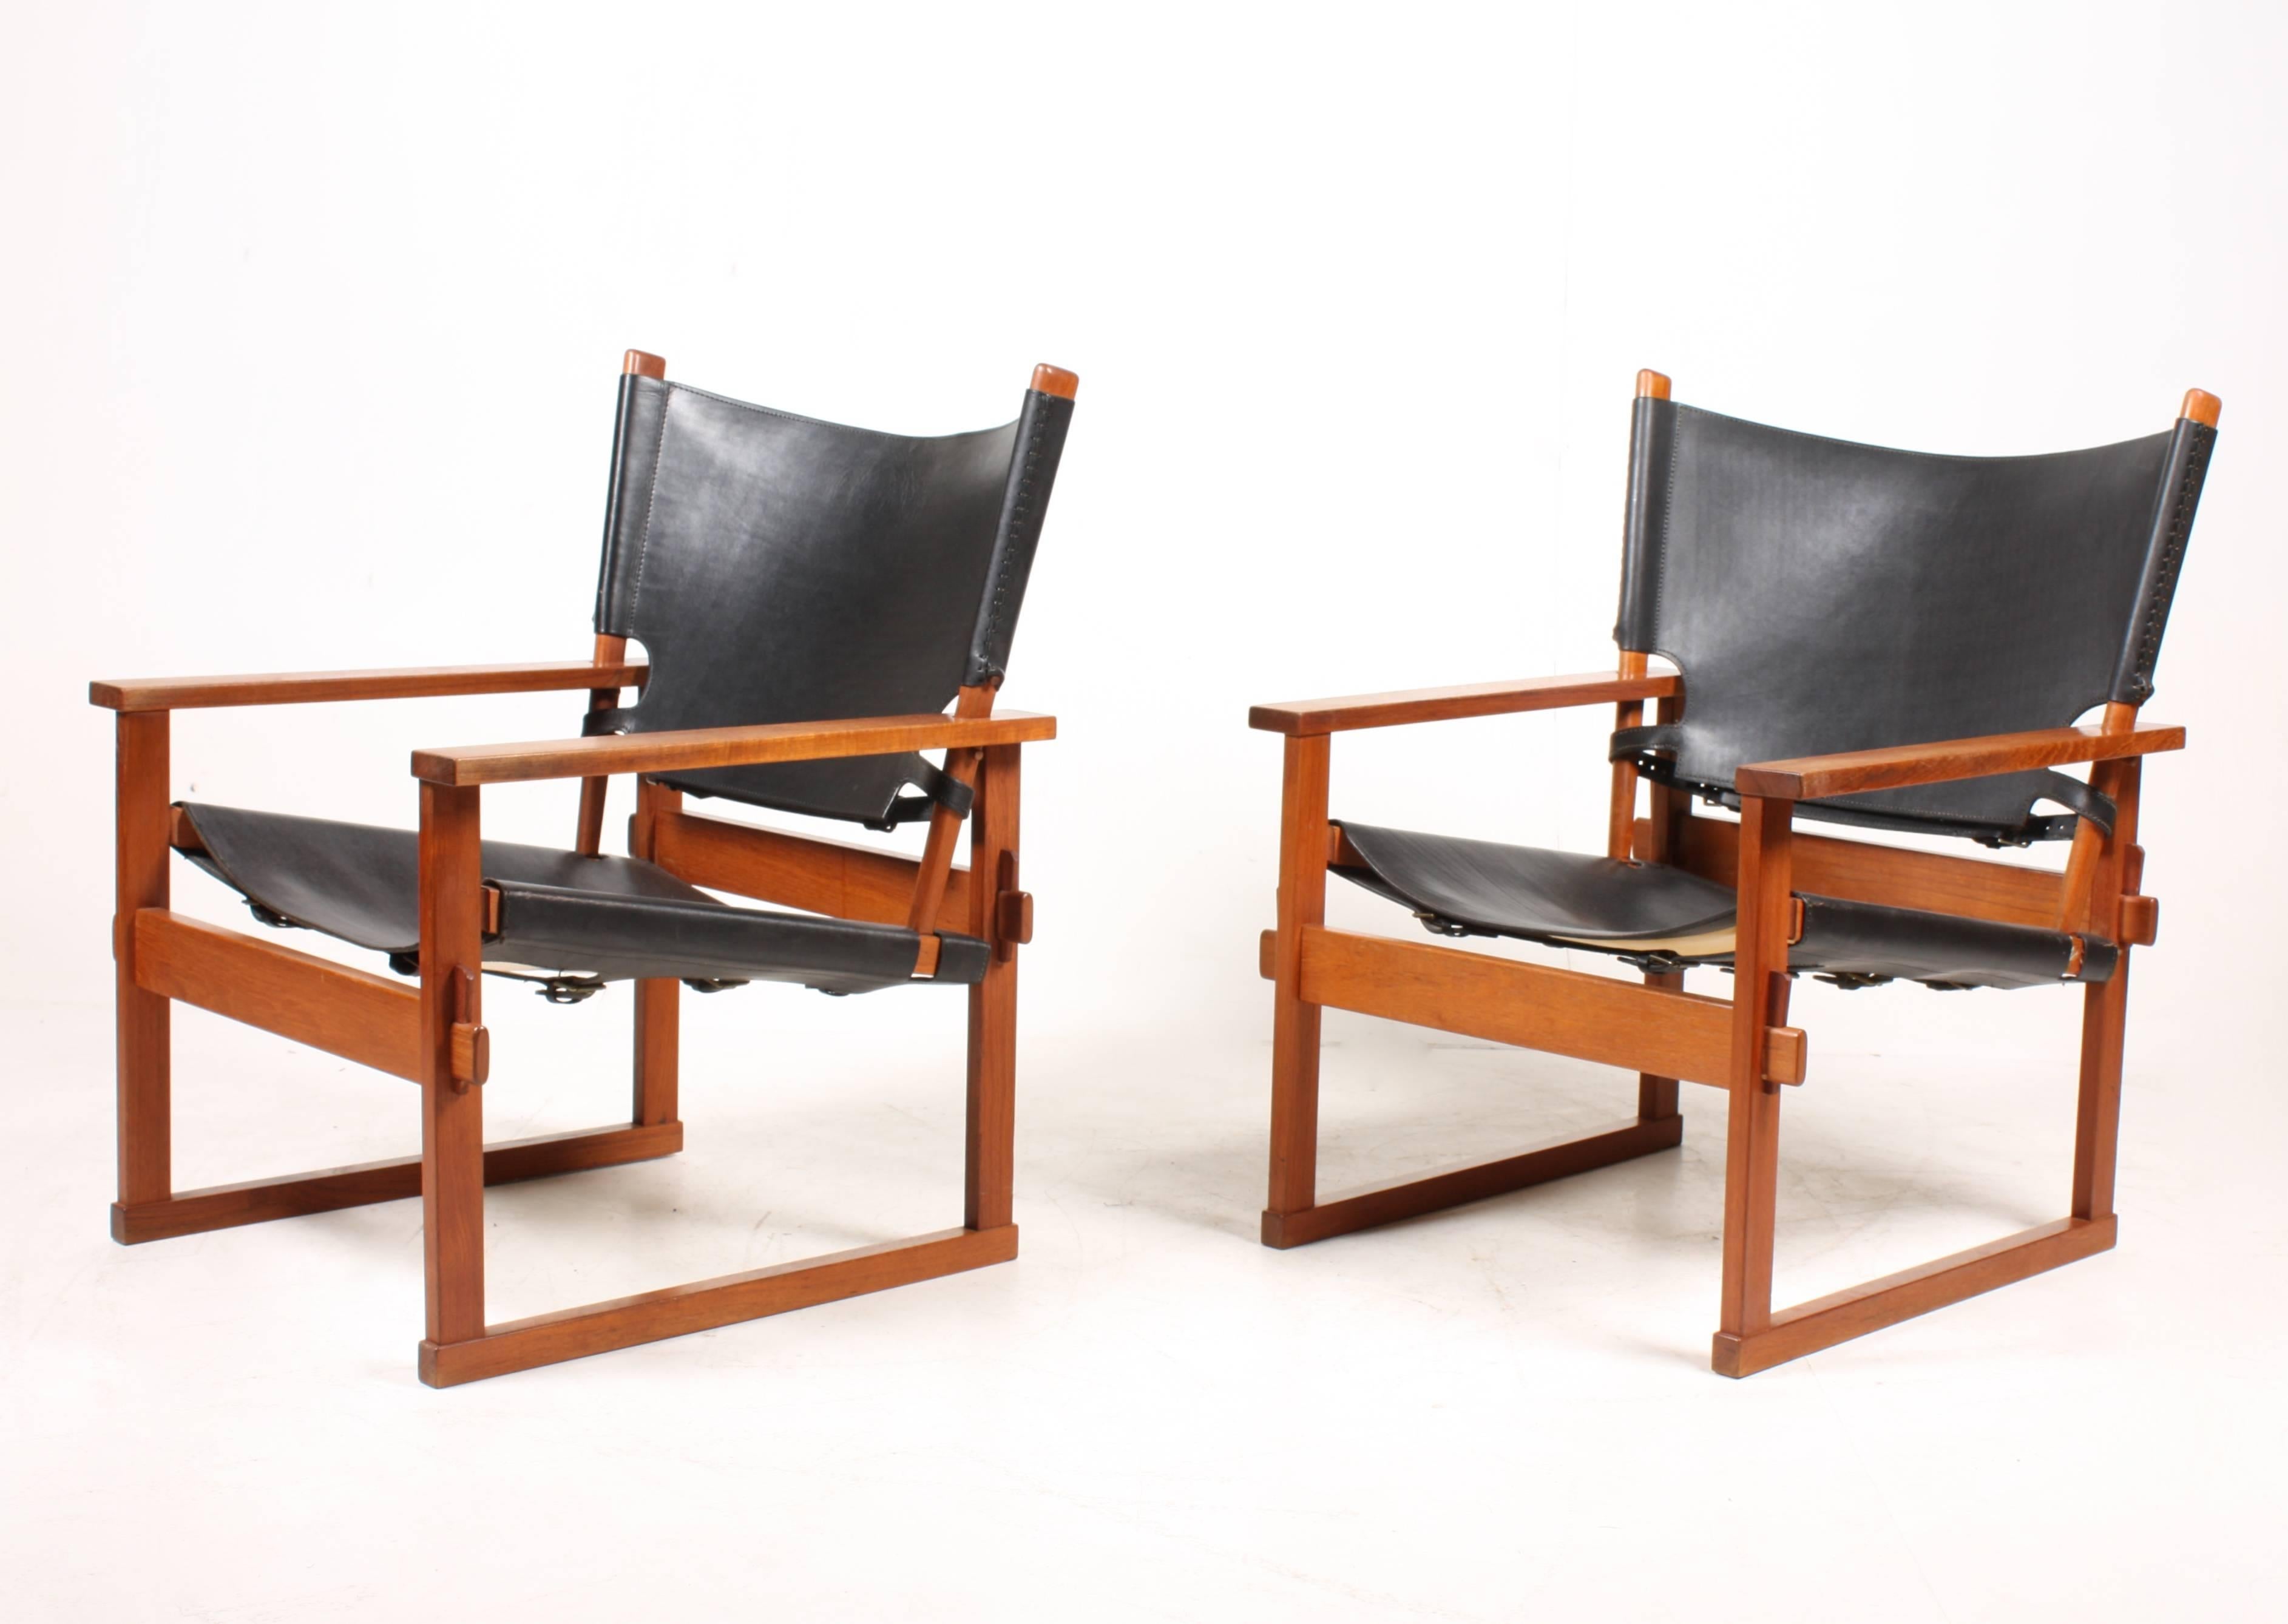 Pair of rare lounge chairs in solid teak and patinated black leather designed by Kai Winding for Poul Hundevad / Vamdrup Denmark in the 1960s. The chairs are in very nice quality and all original condition.